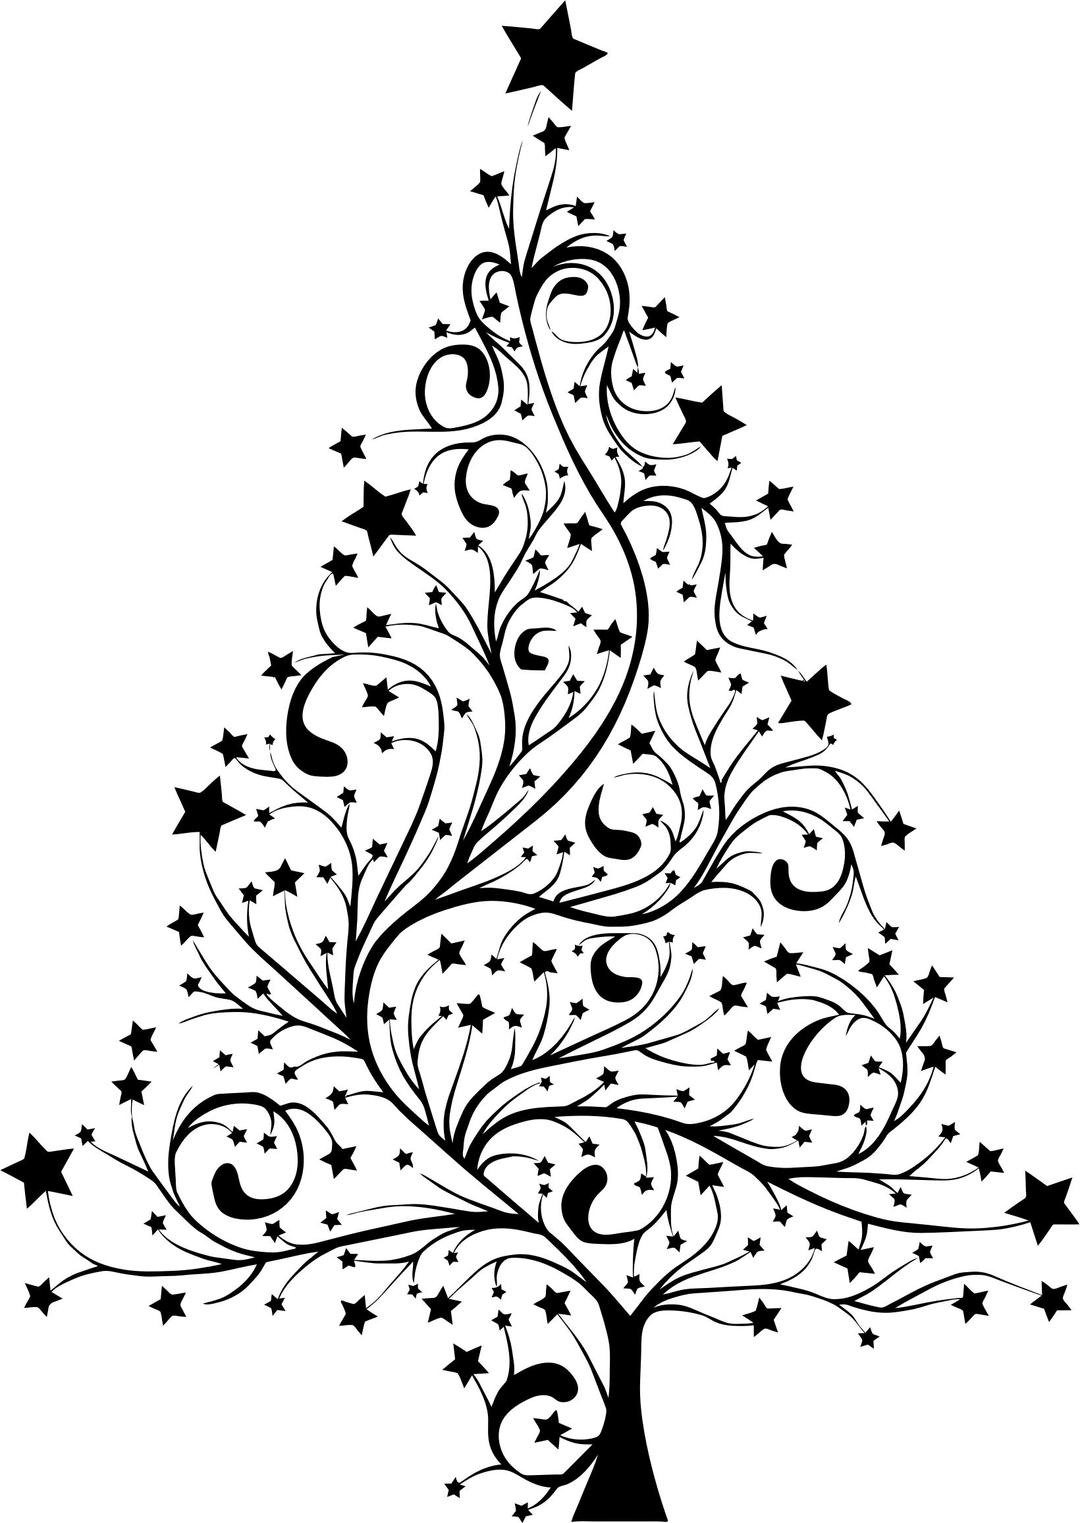 Starry Christmas Tree Silhouette png transparent